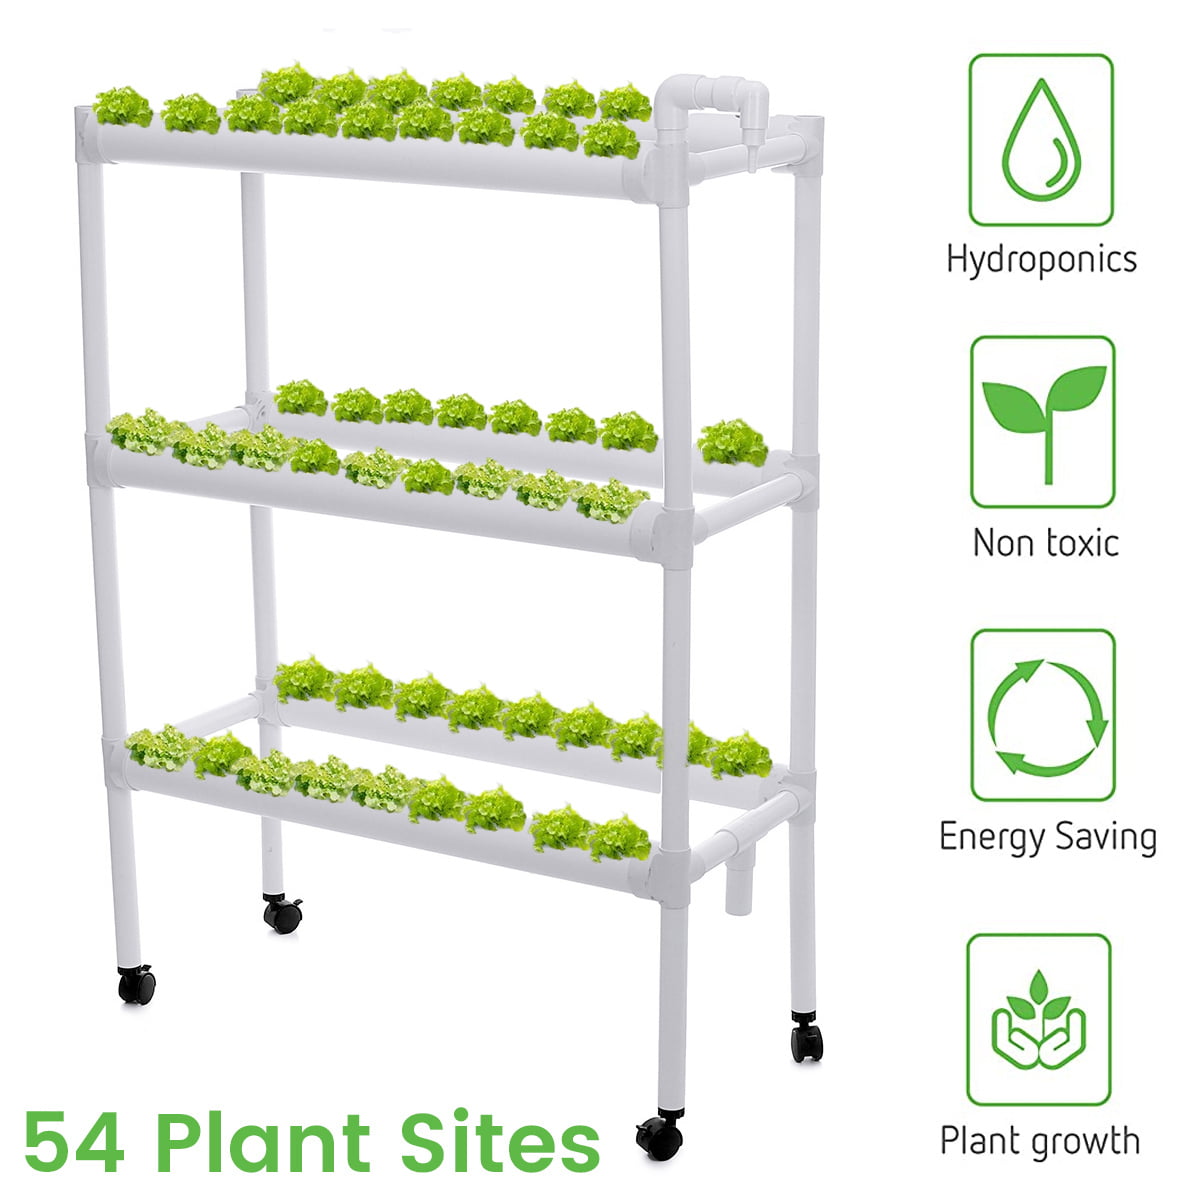 TECHTONGDA Hydroponic 72 Plant Grow Kit 2 Layers 8 Pipes 110v Water Pump for sale online 